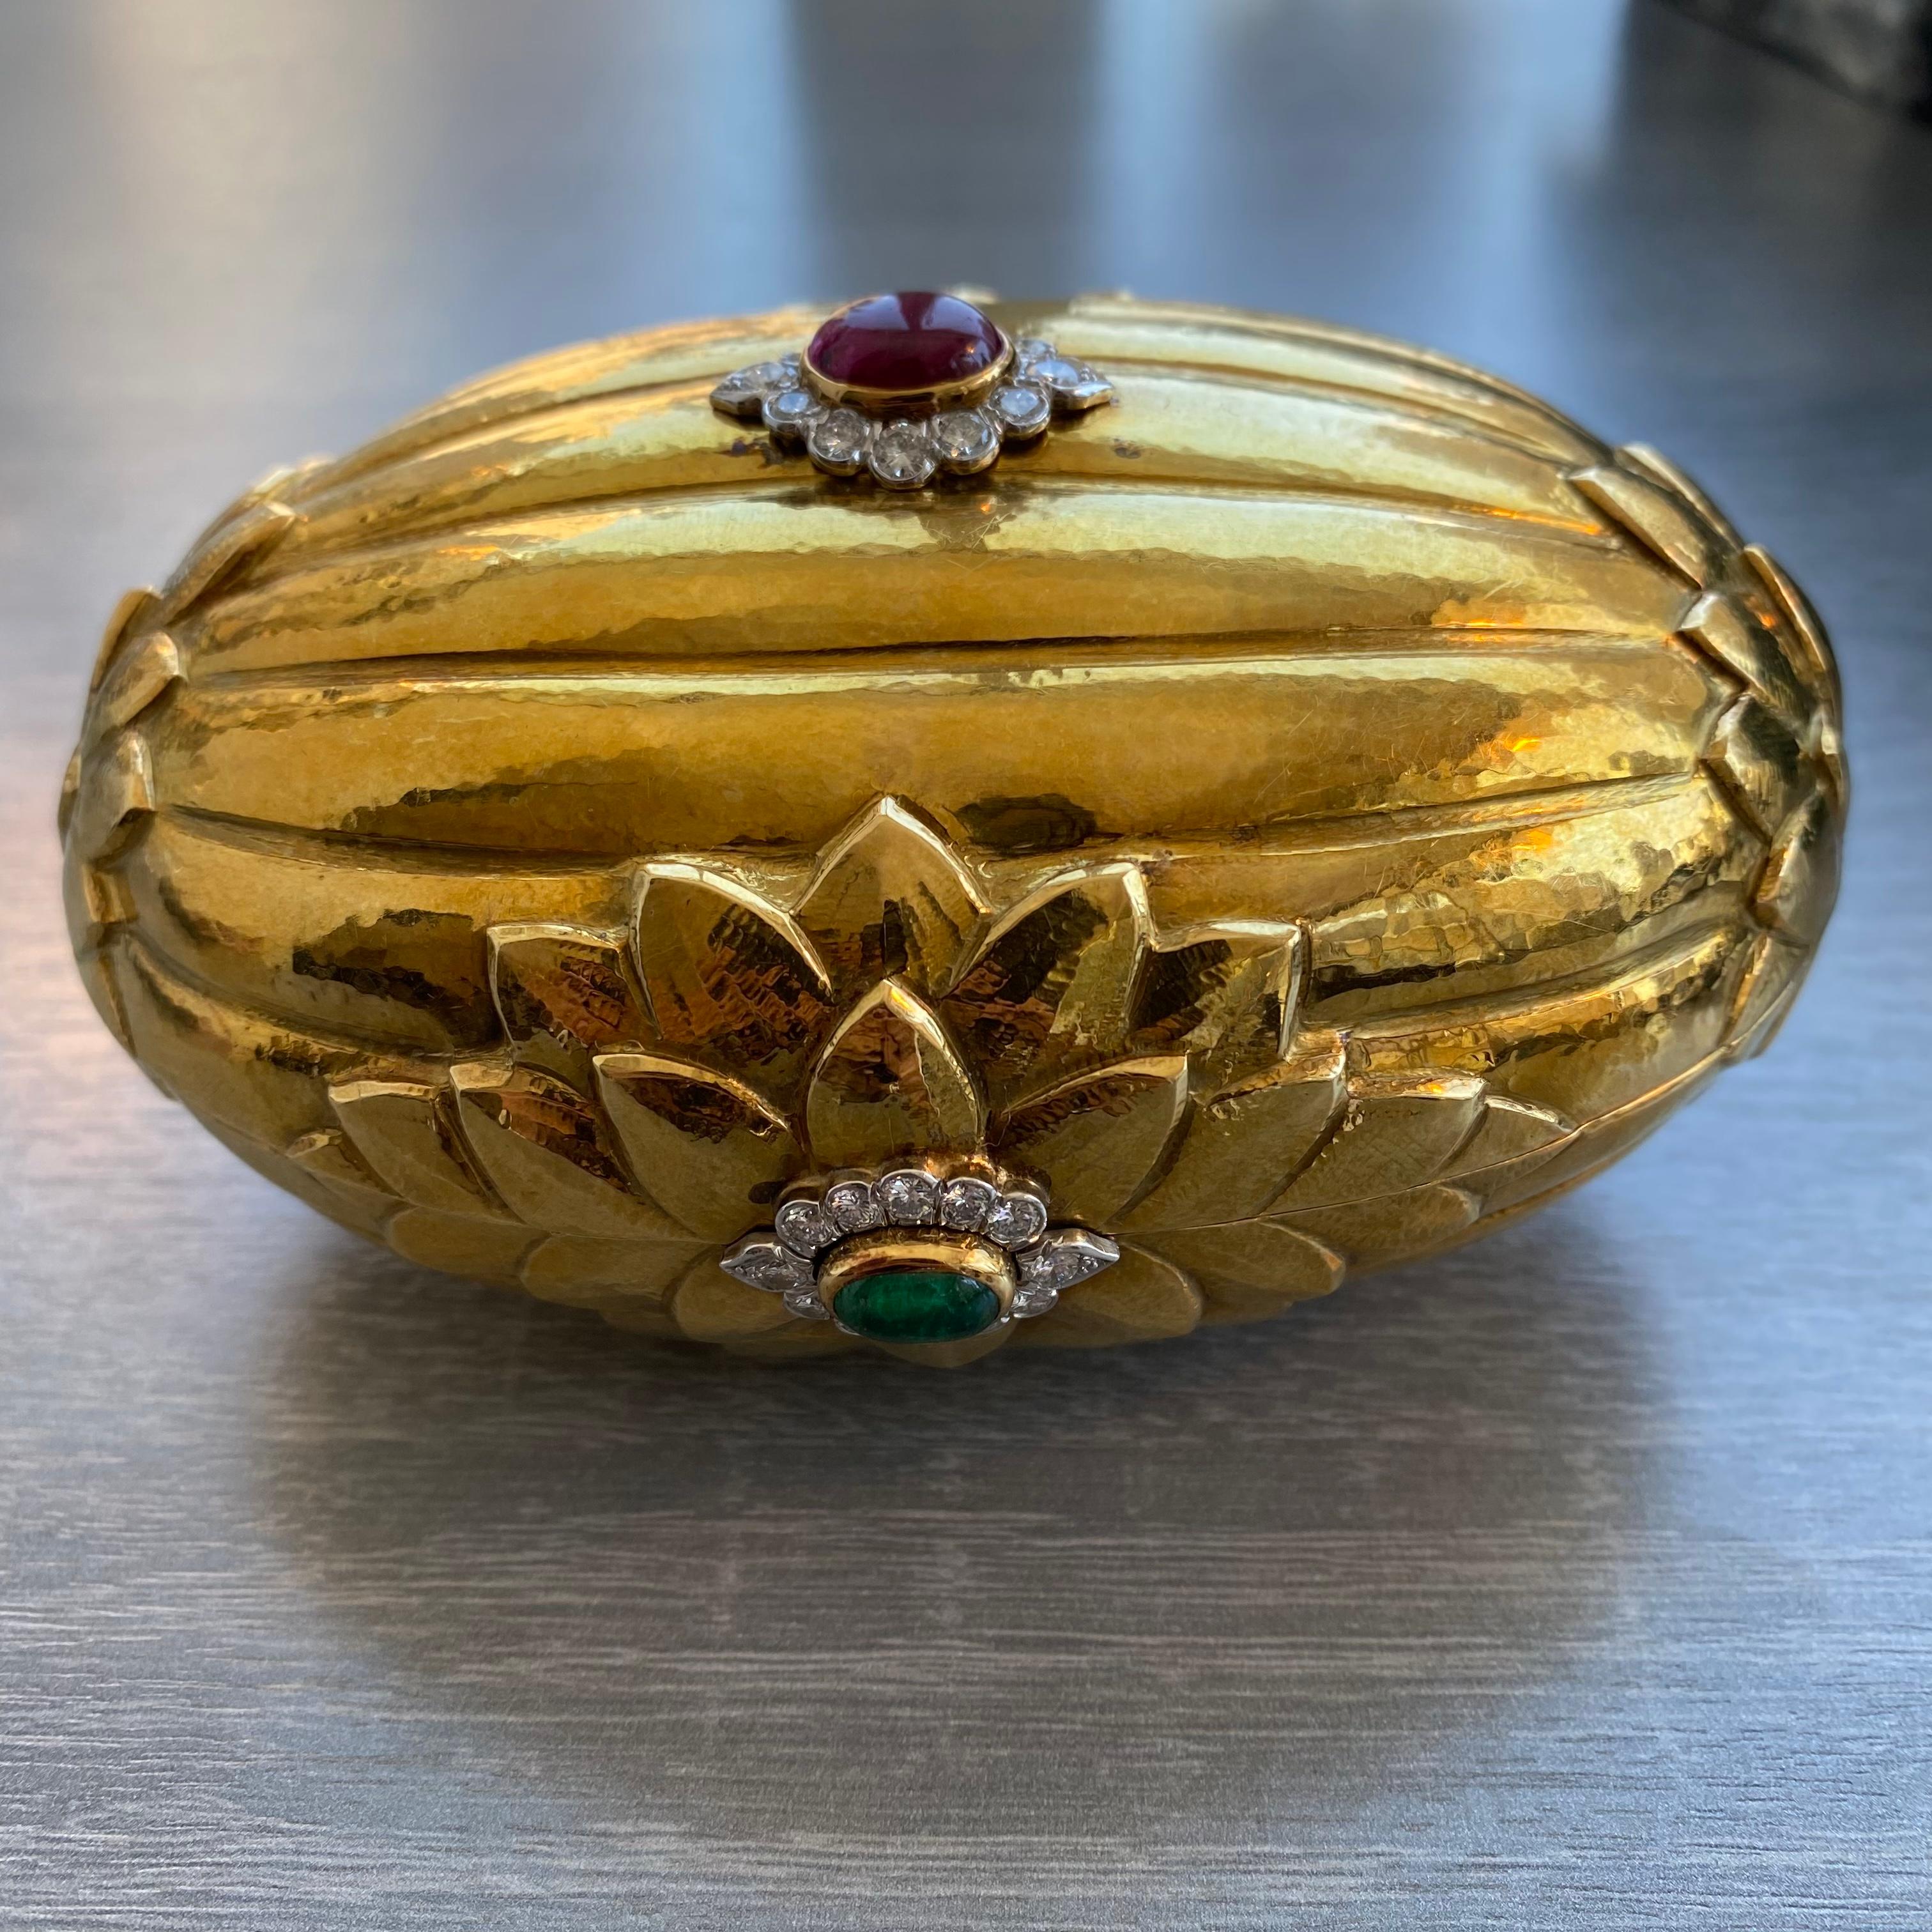 Mutli Gem Gold Clutch by David Webb In Excellent Condition For Sale In New York, NY